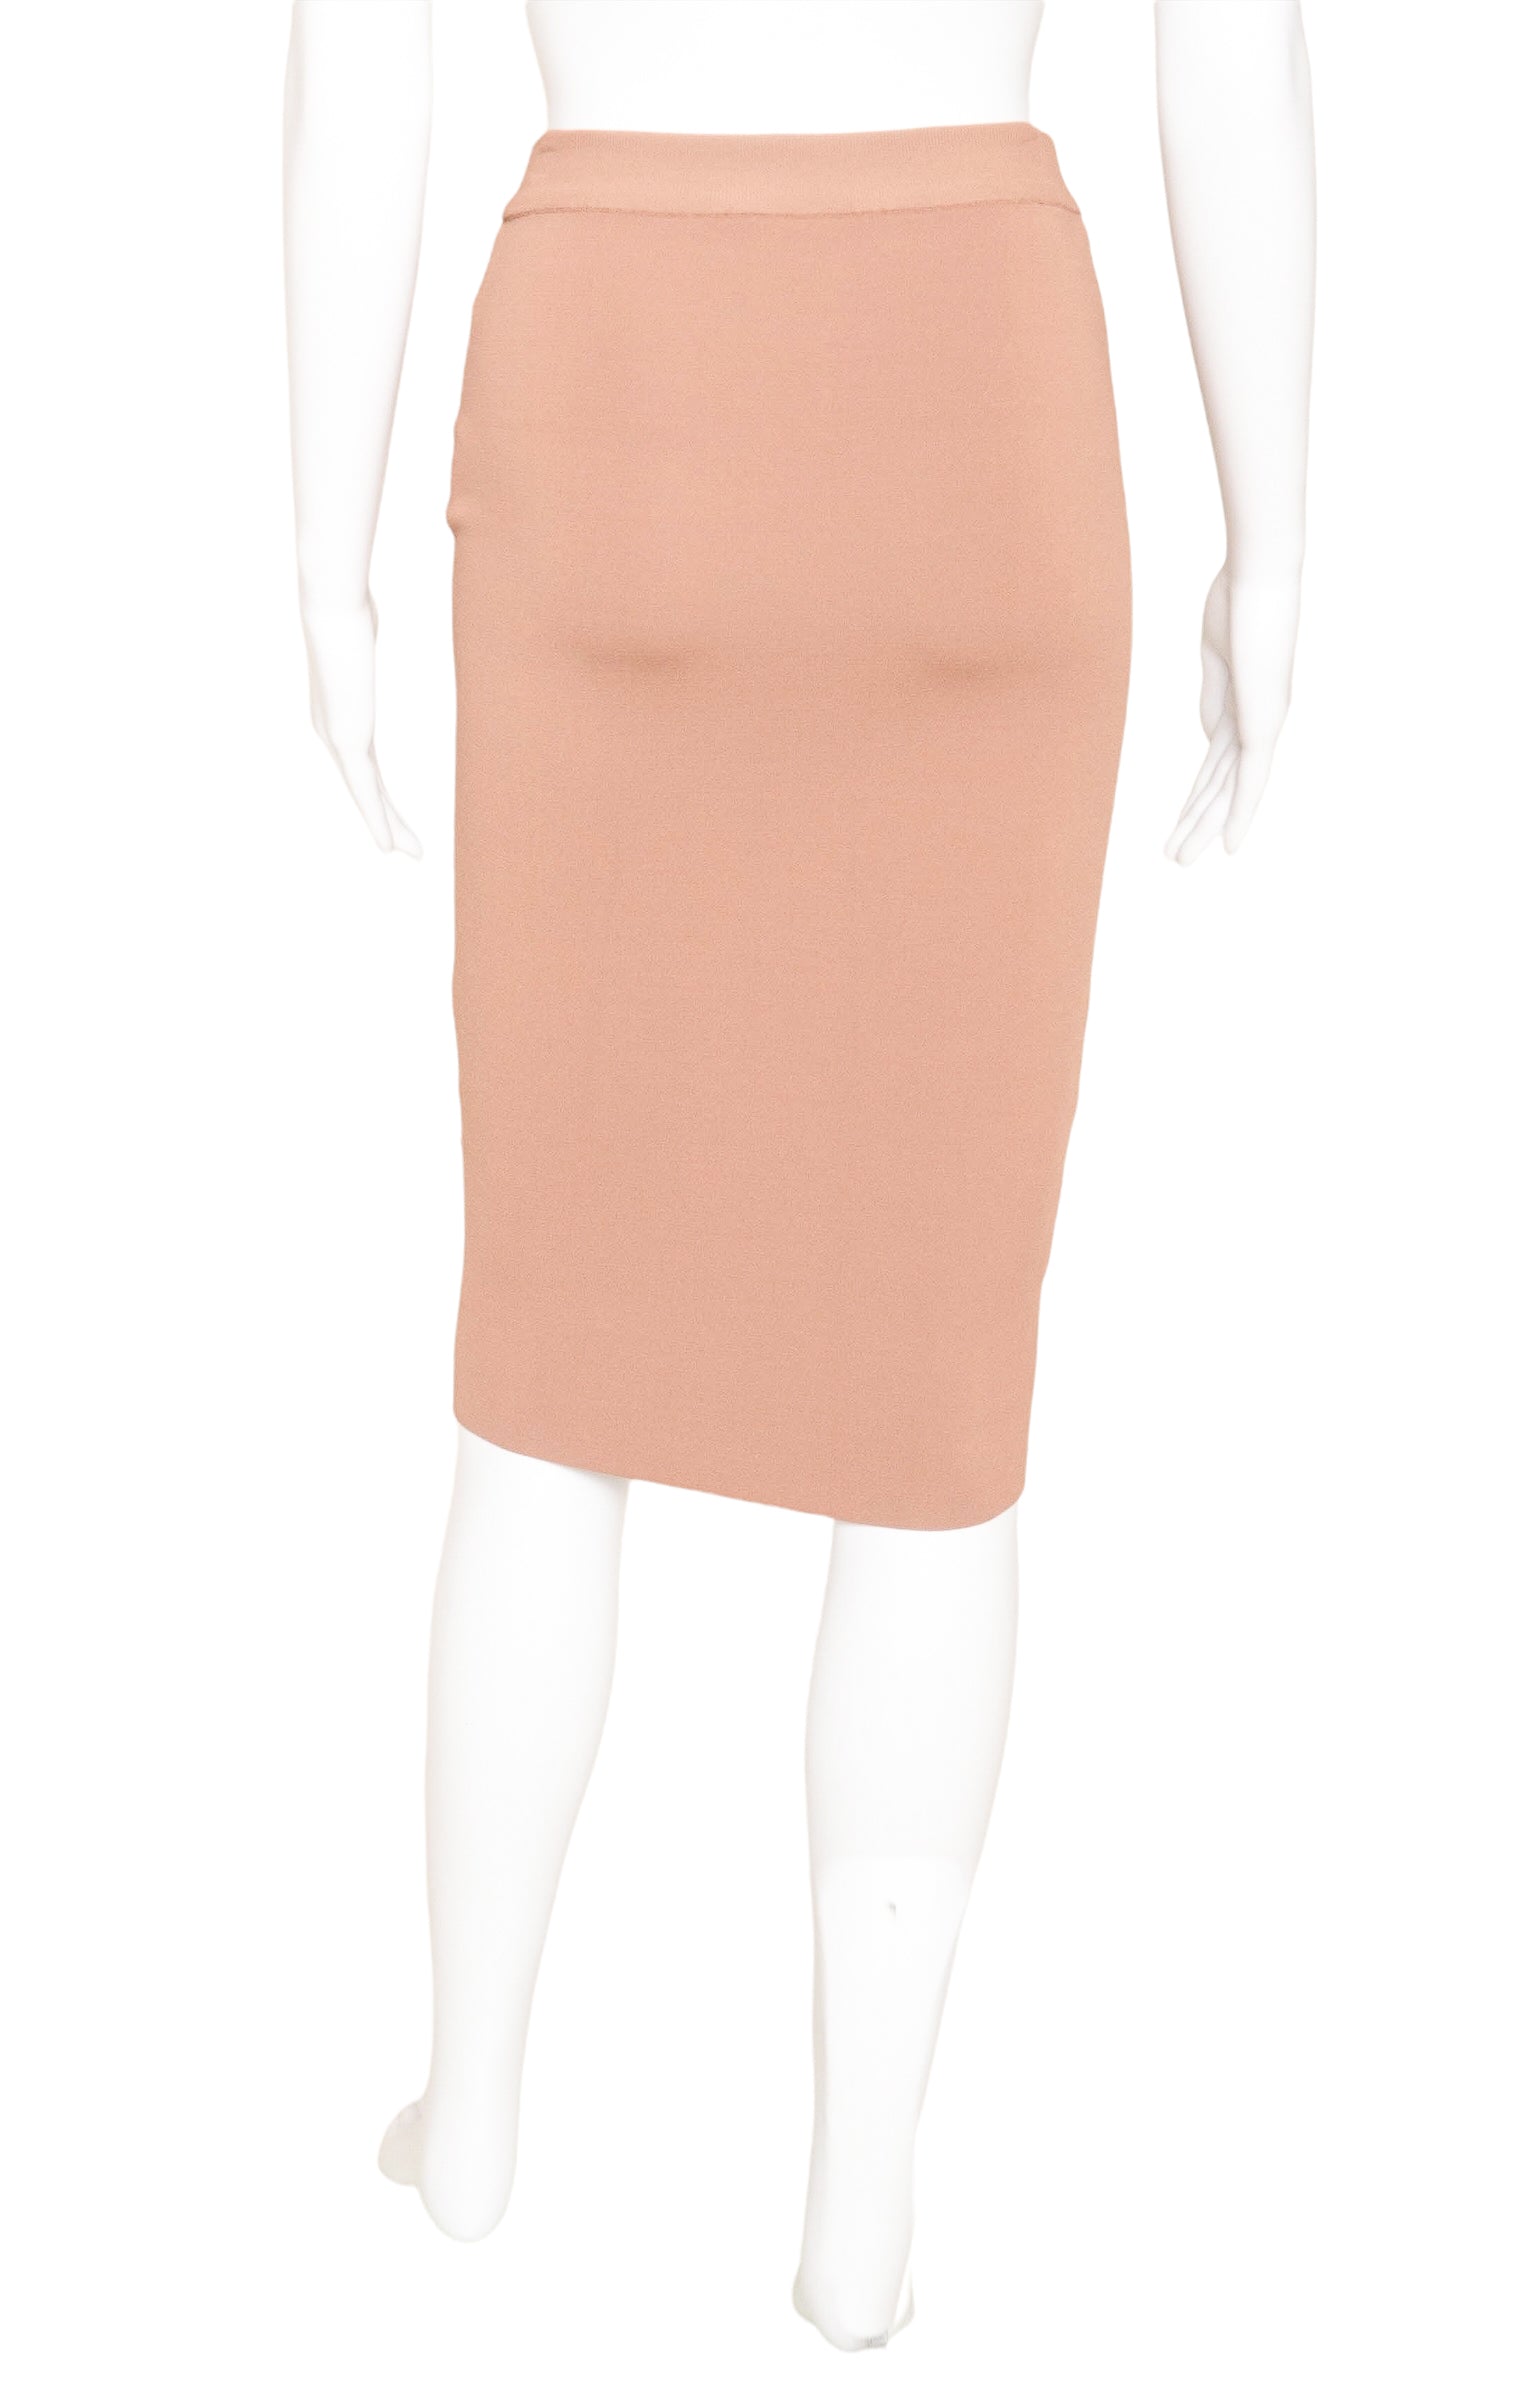 STELLA MCCARTNEY (RARE) Skirt Size: IT 38 / Comparable to US 0-2